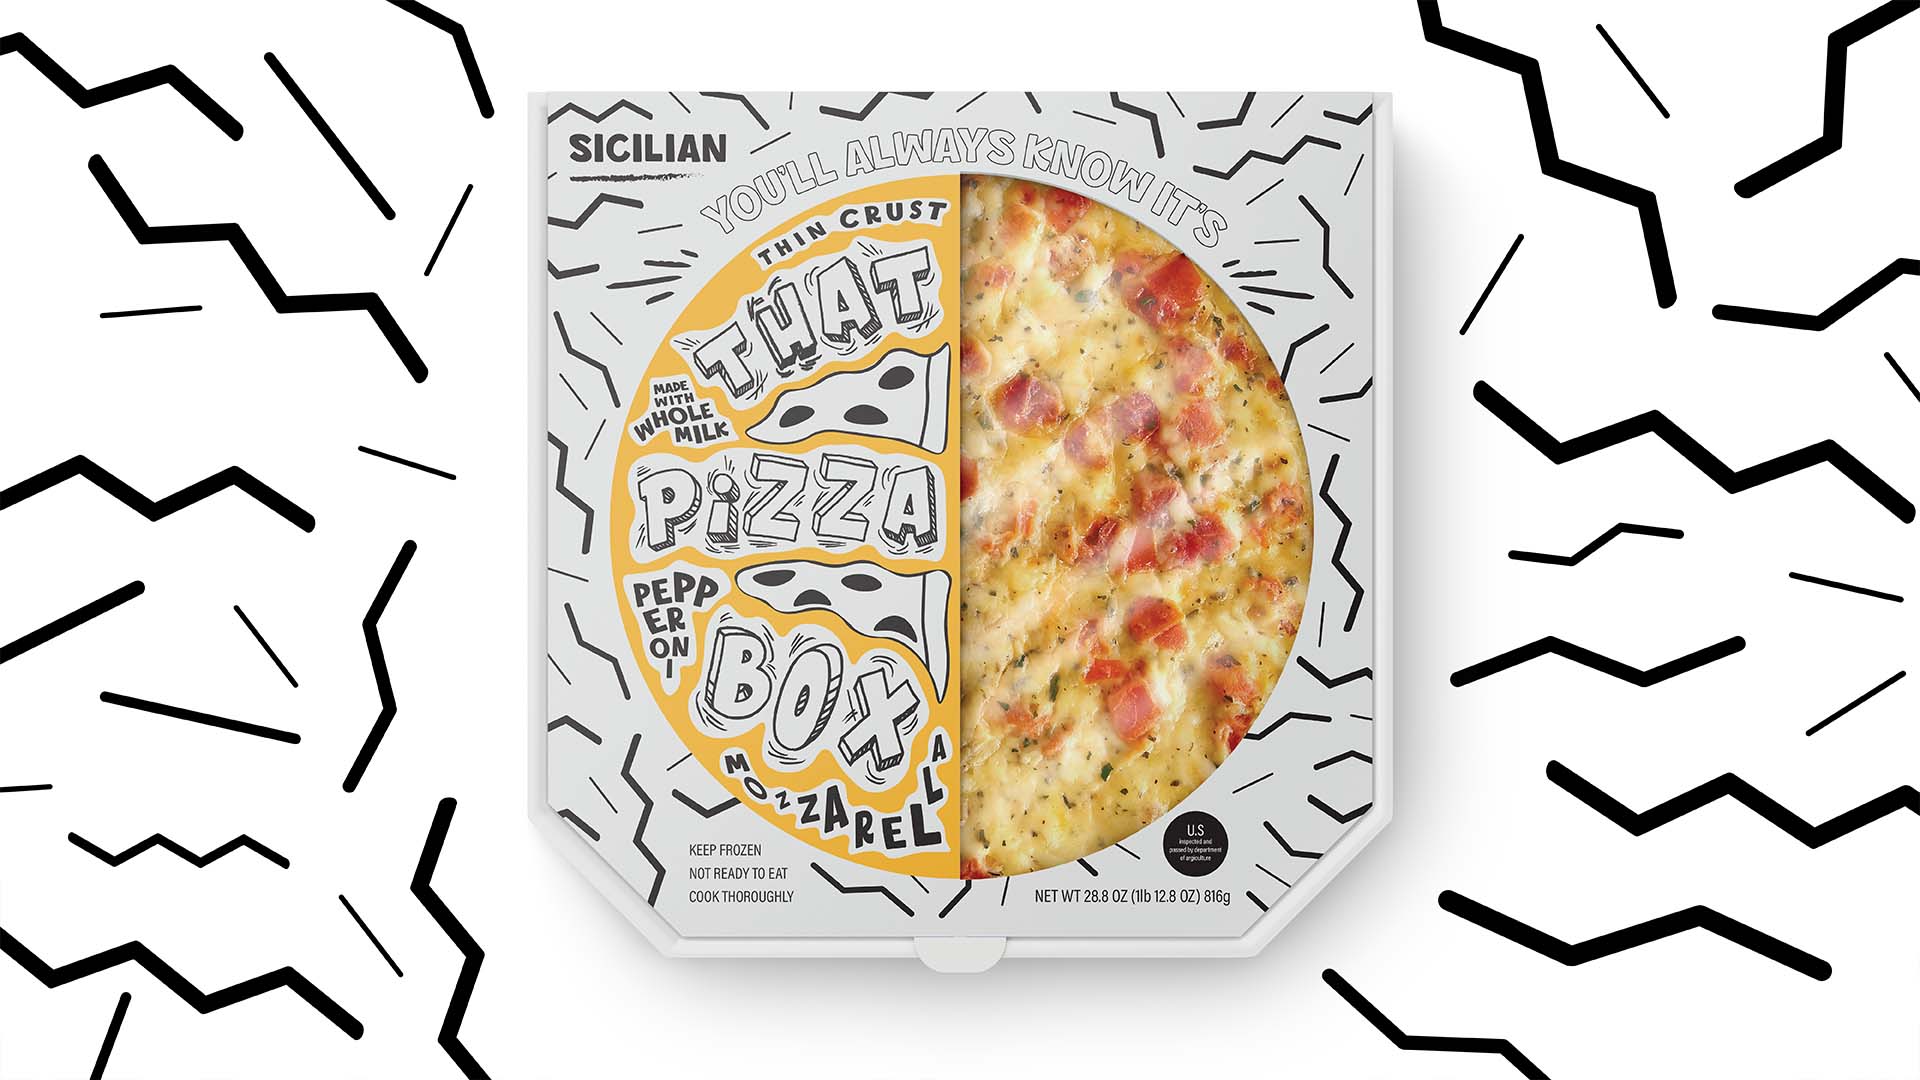  / “That Pizza Box,” Print, 16 inches X 18 inches cardboard box, 2021. A frozen pizza package designed to stand out. 